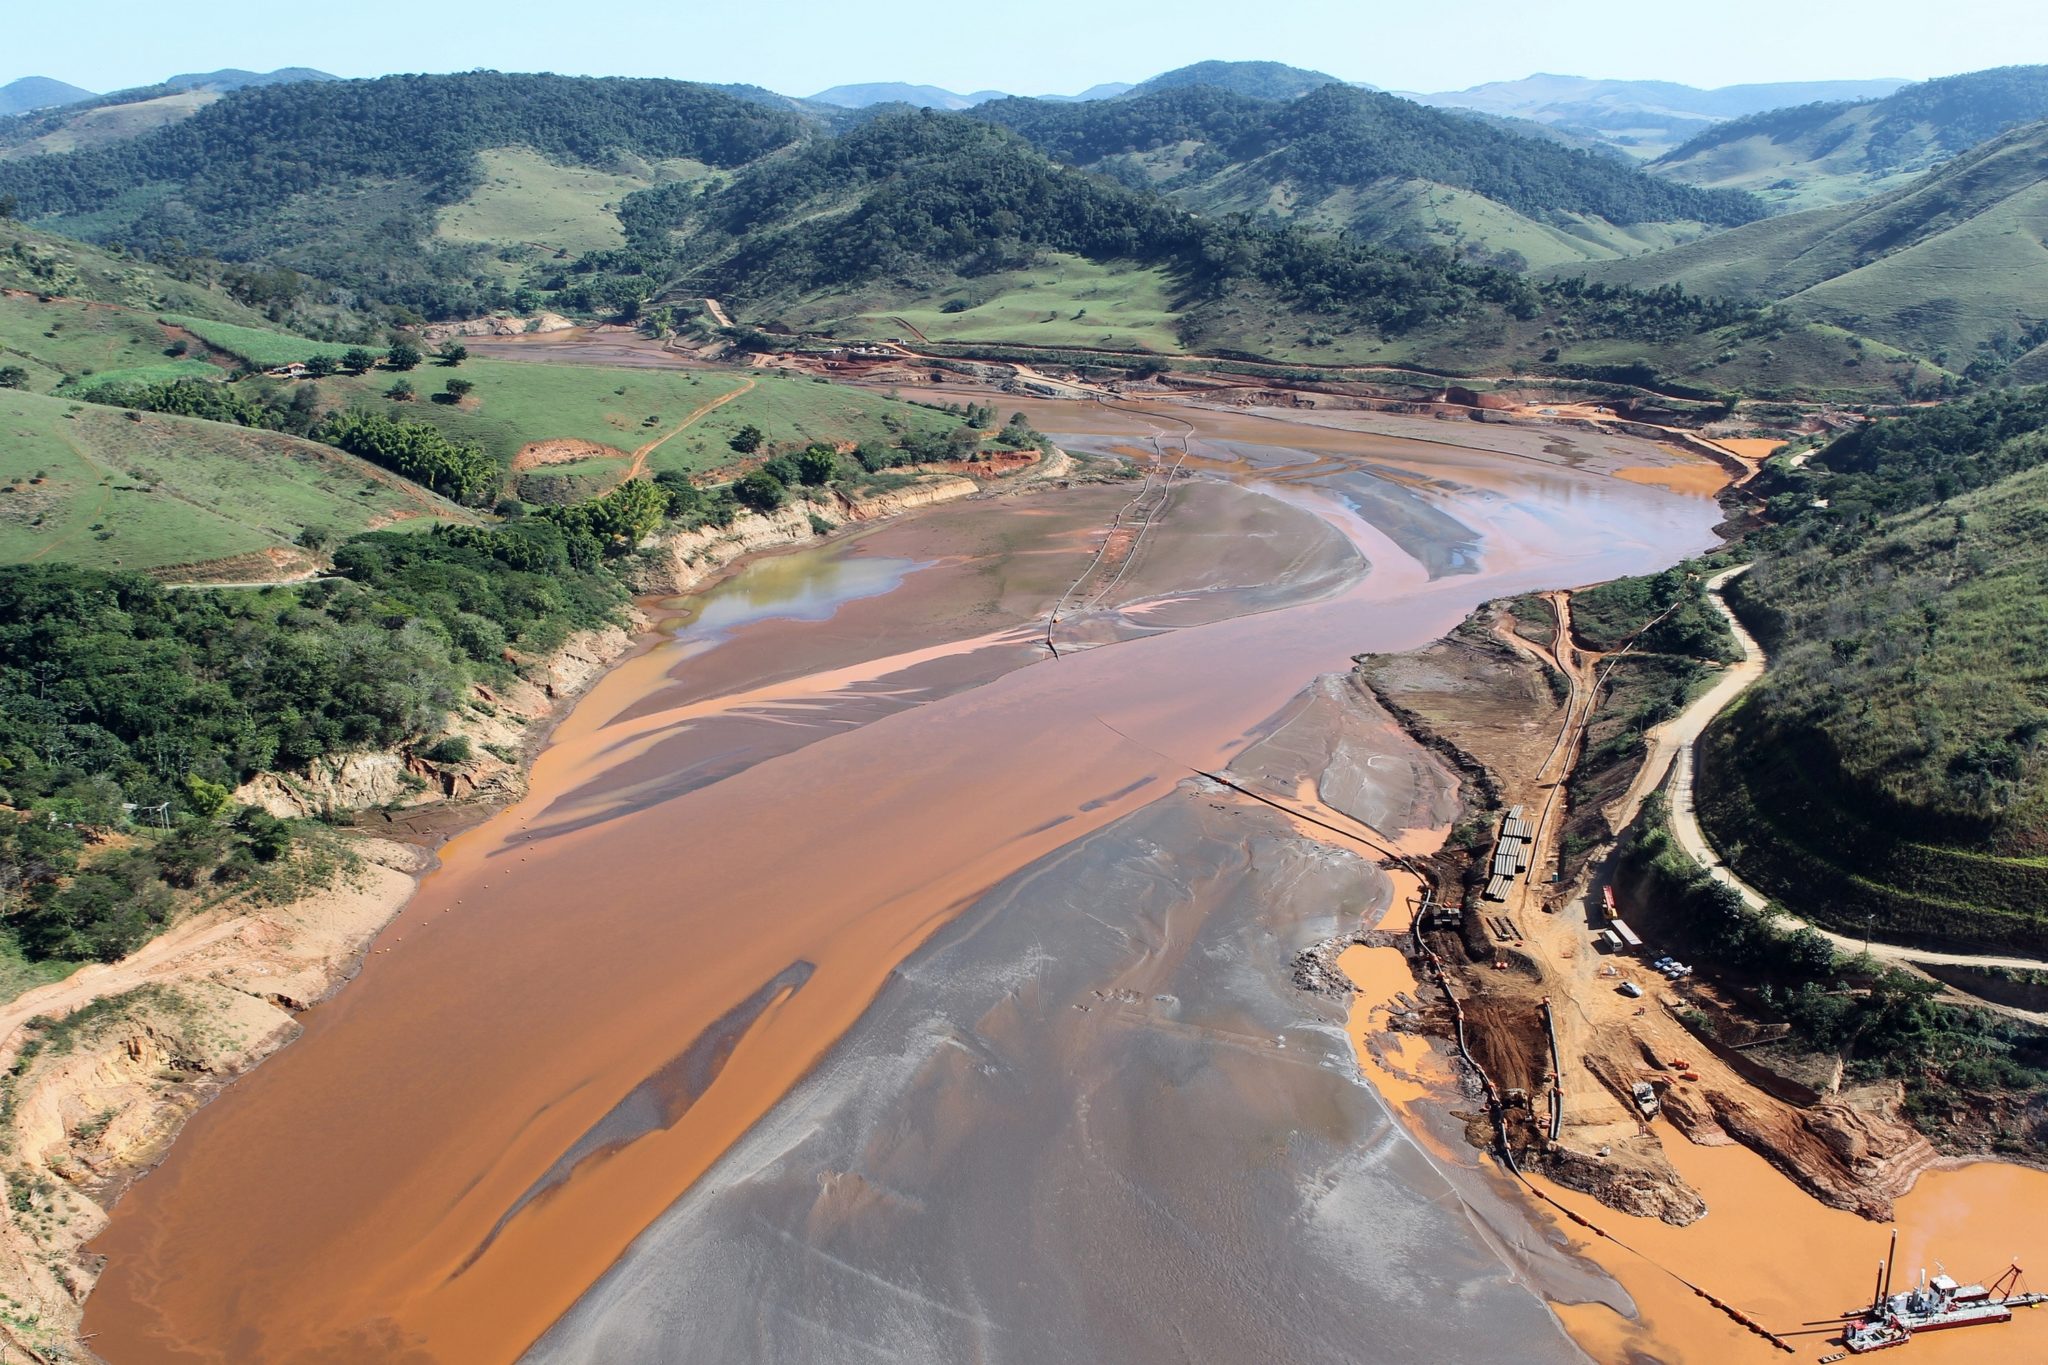 <p>The Brumadinho dam collapse comes just three years after a similar catastrophe in Mariana (image: <a href="https://upload.wikimedia.org/wikipedia/commons/1/1b/Opera%C3%A7%C3%A3o_%C3%81ugias%2C_Julho-2016_%2829077699023%29.jpg">WikiCommons</a>)</p>